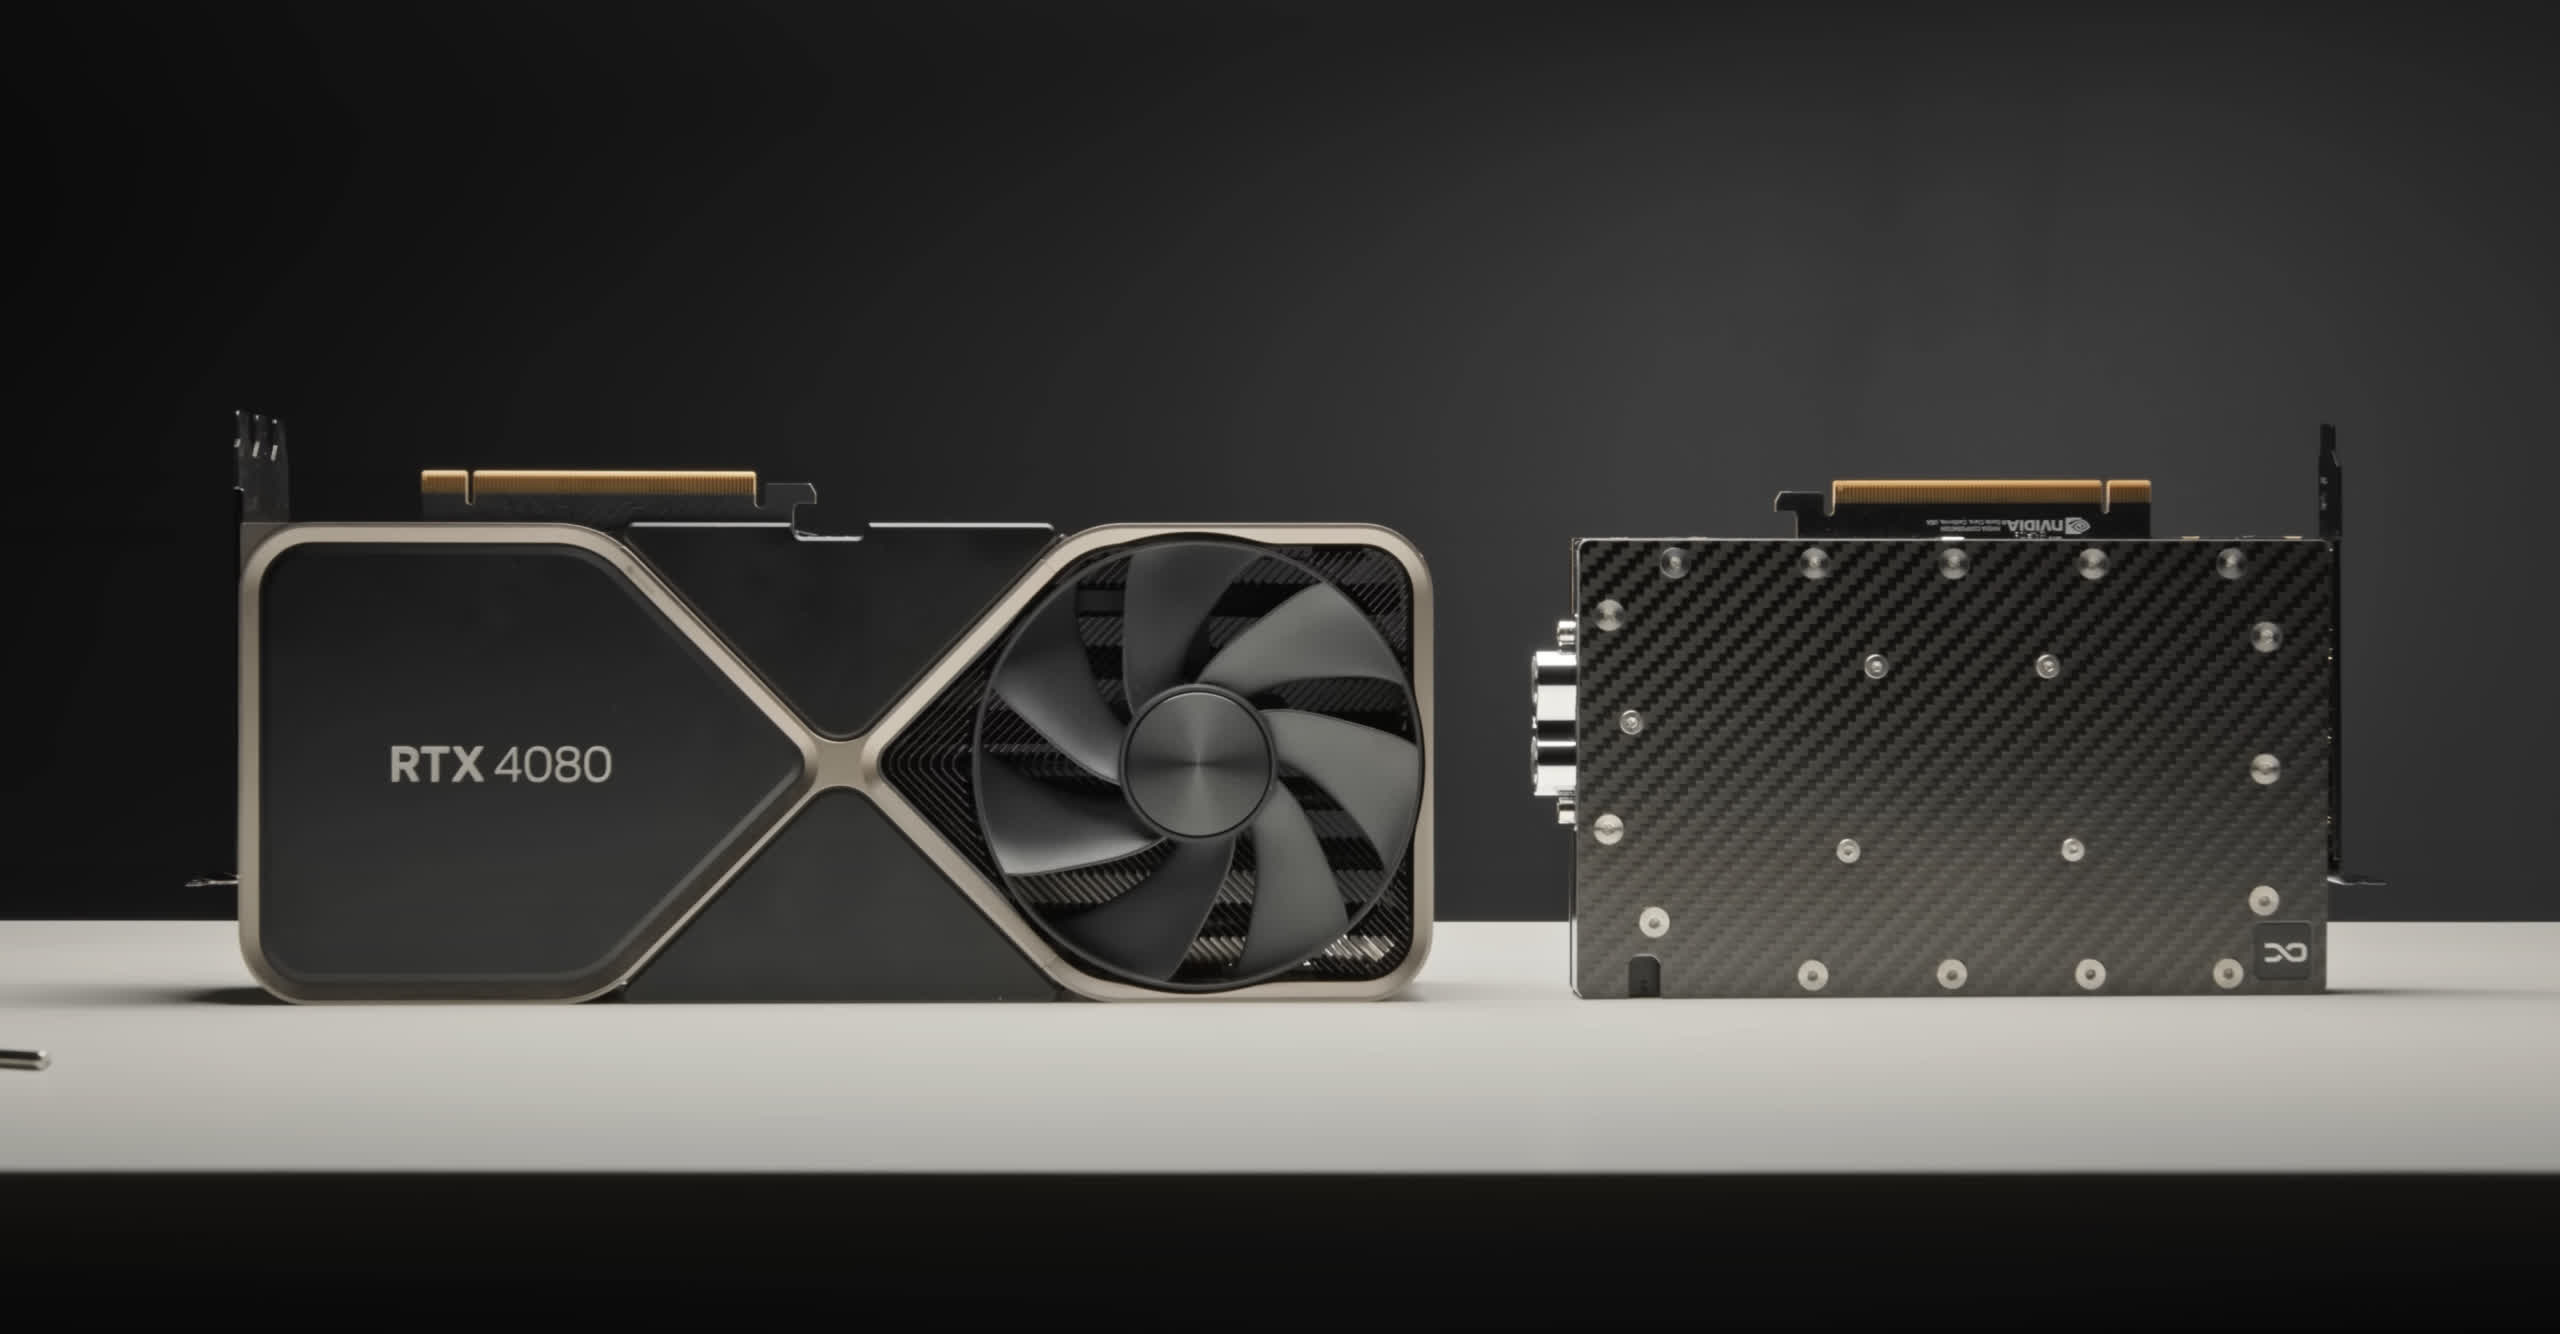 This water-cooling mod reduces Nvidia RTX 4090's footprint to fit inside an ITX case